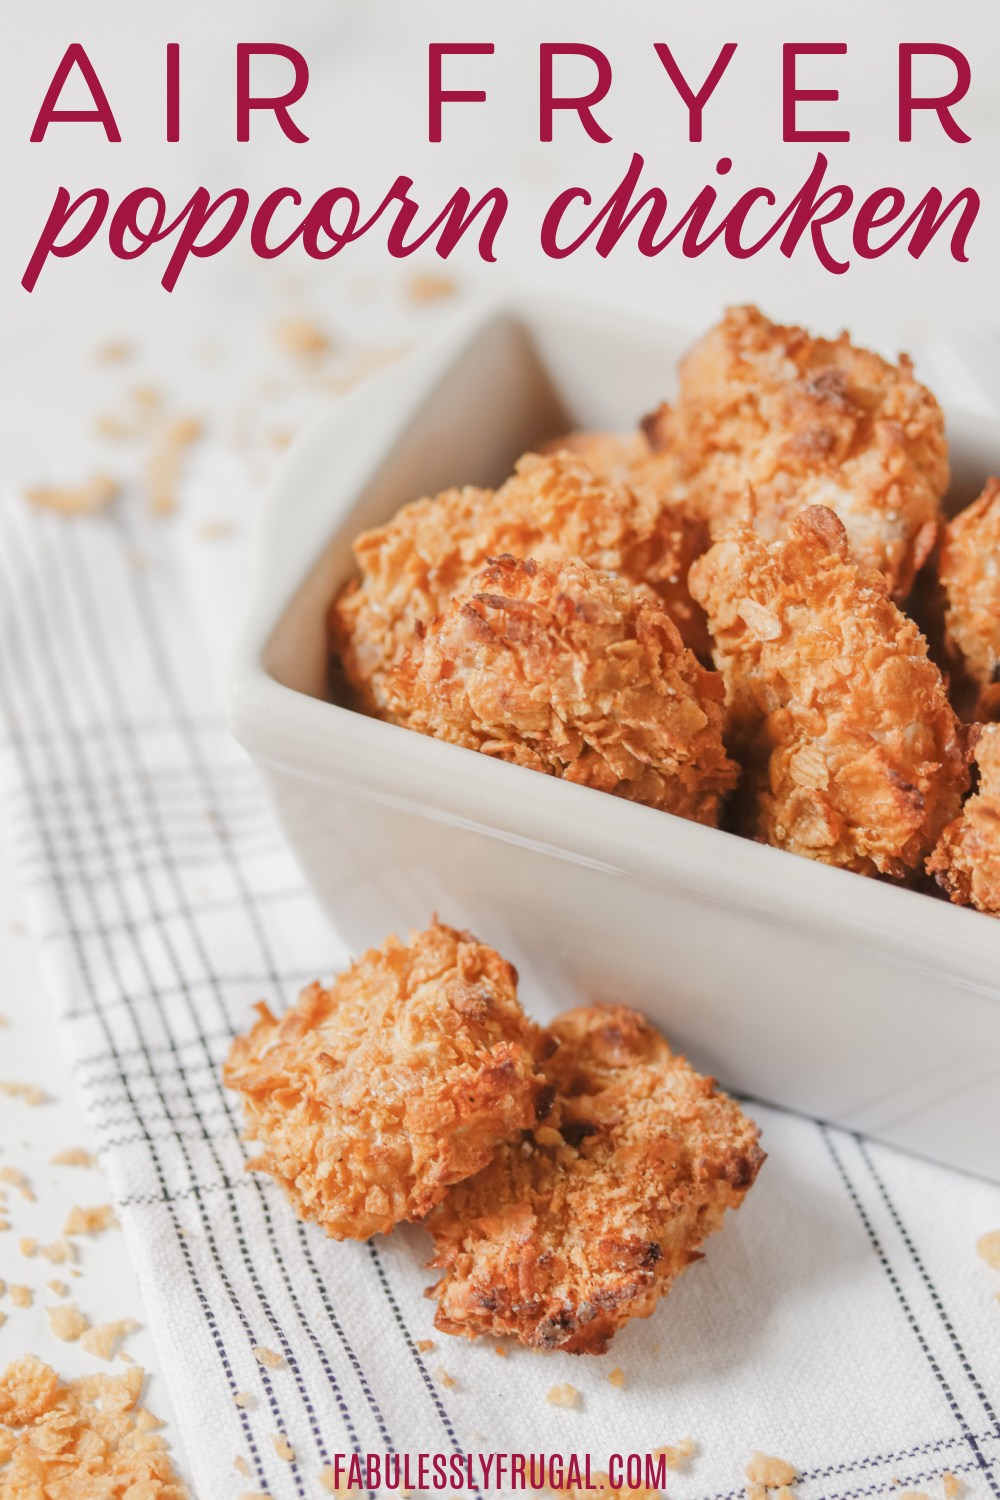 Air fryer popcorn chicken is our family's new favorite go-to dinner. It's ready in 20 minutes and tastes so yummy!